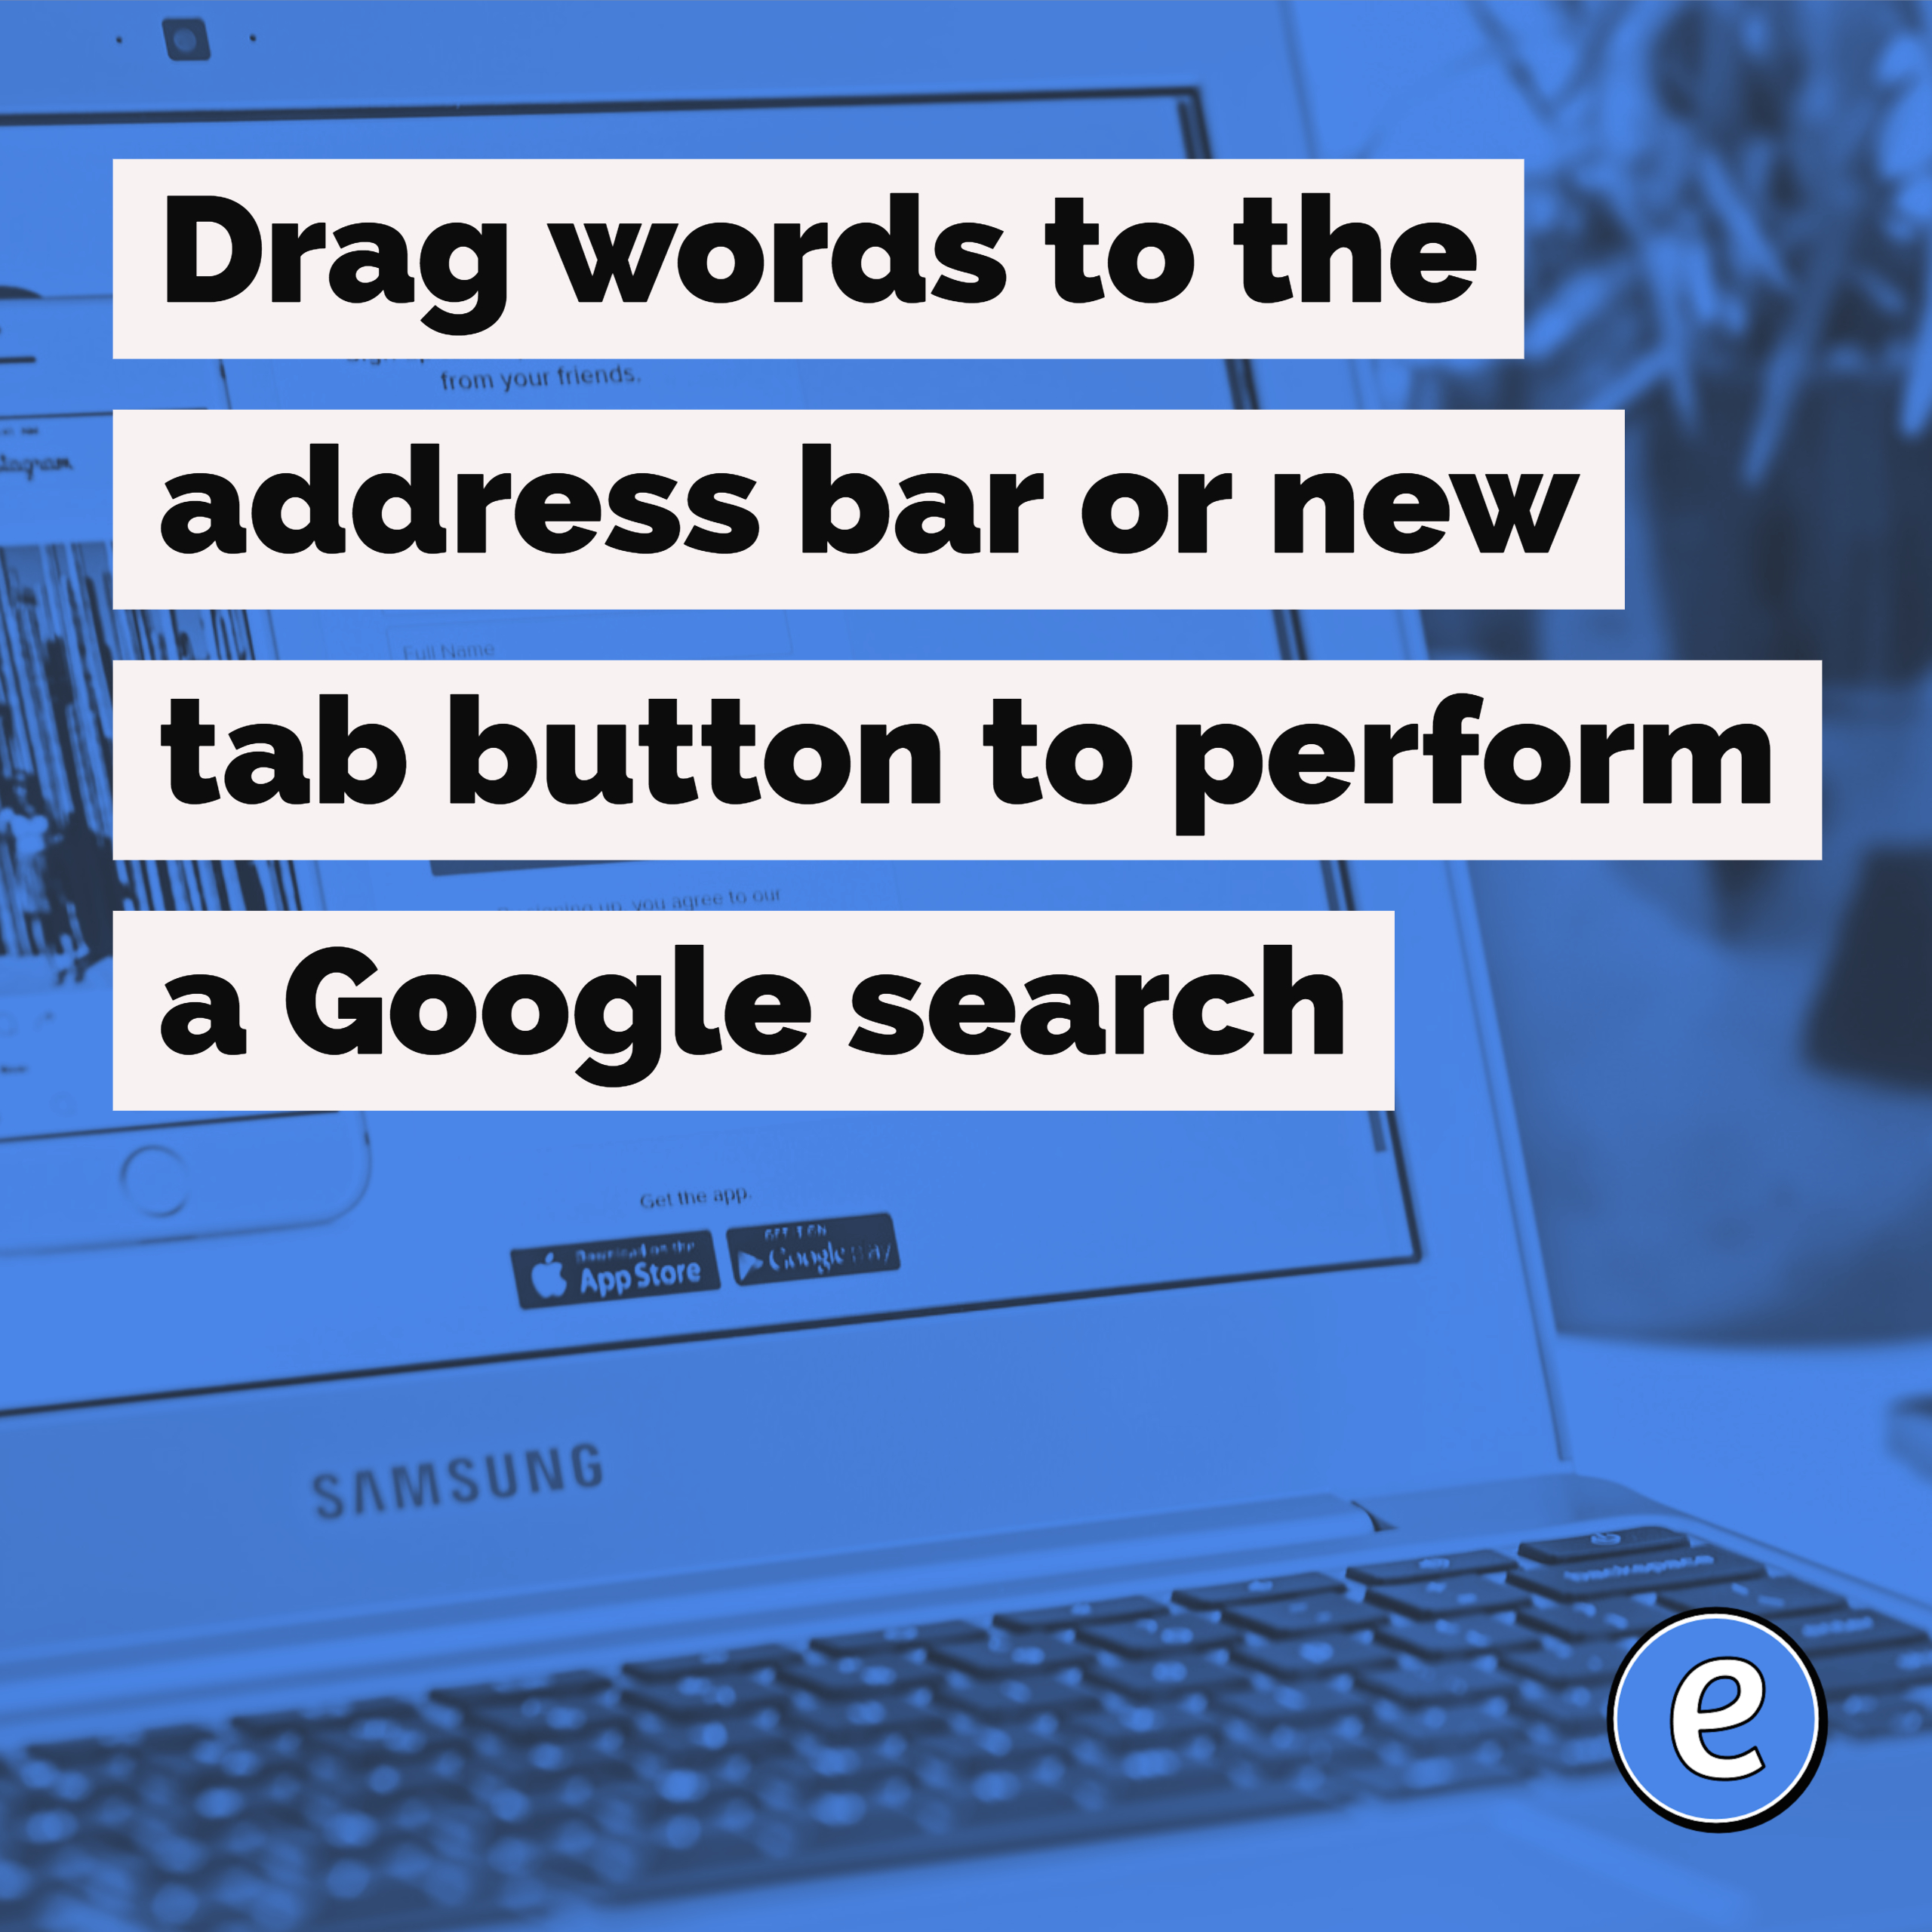 Drag words to the address bar or new tab button to perform a Google search